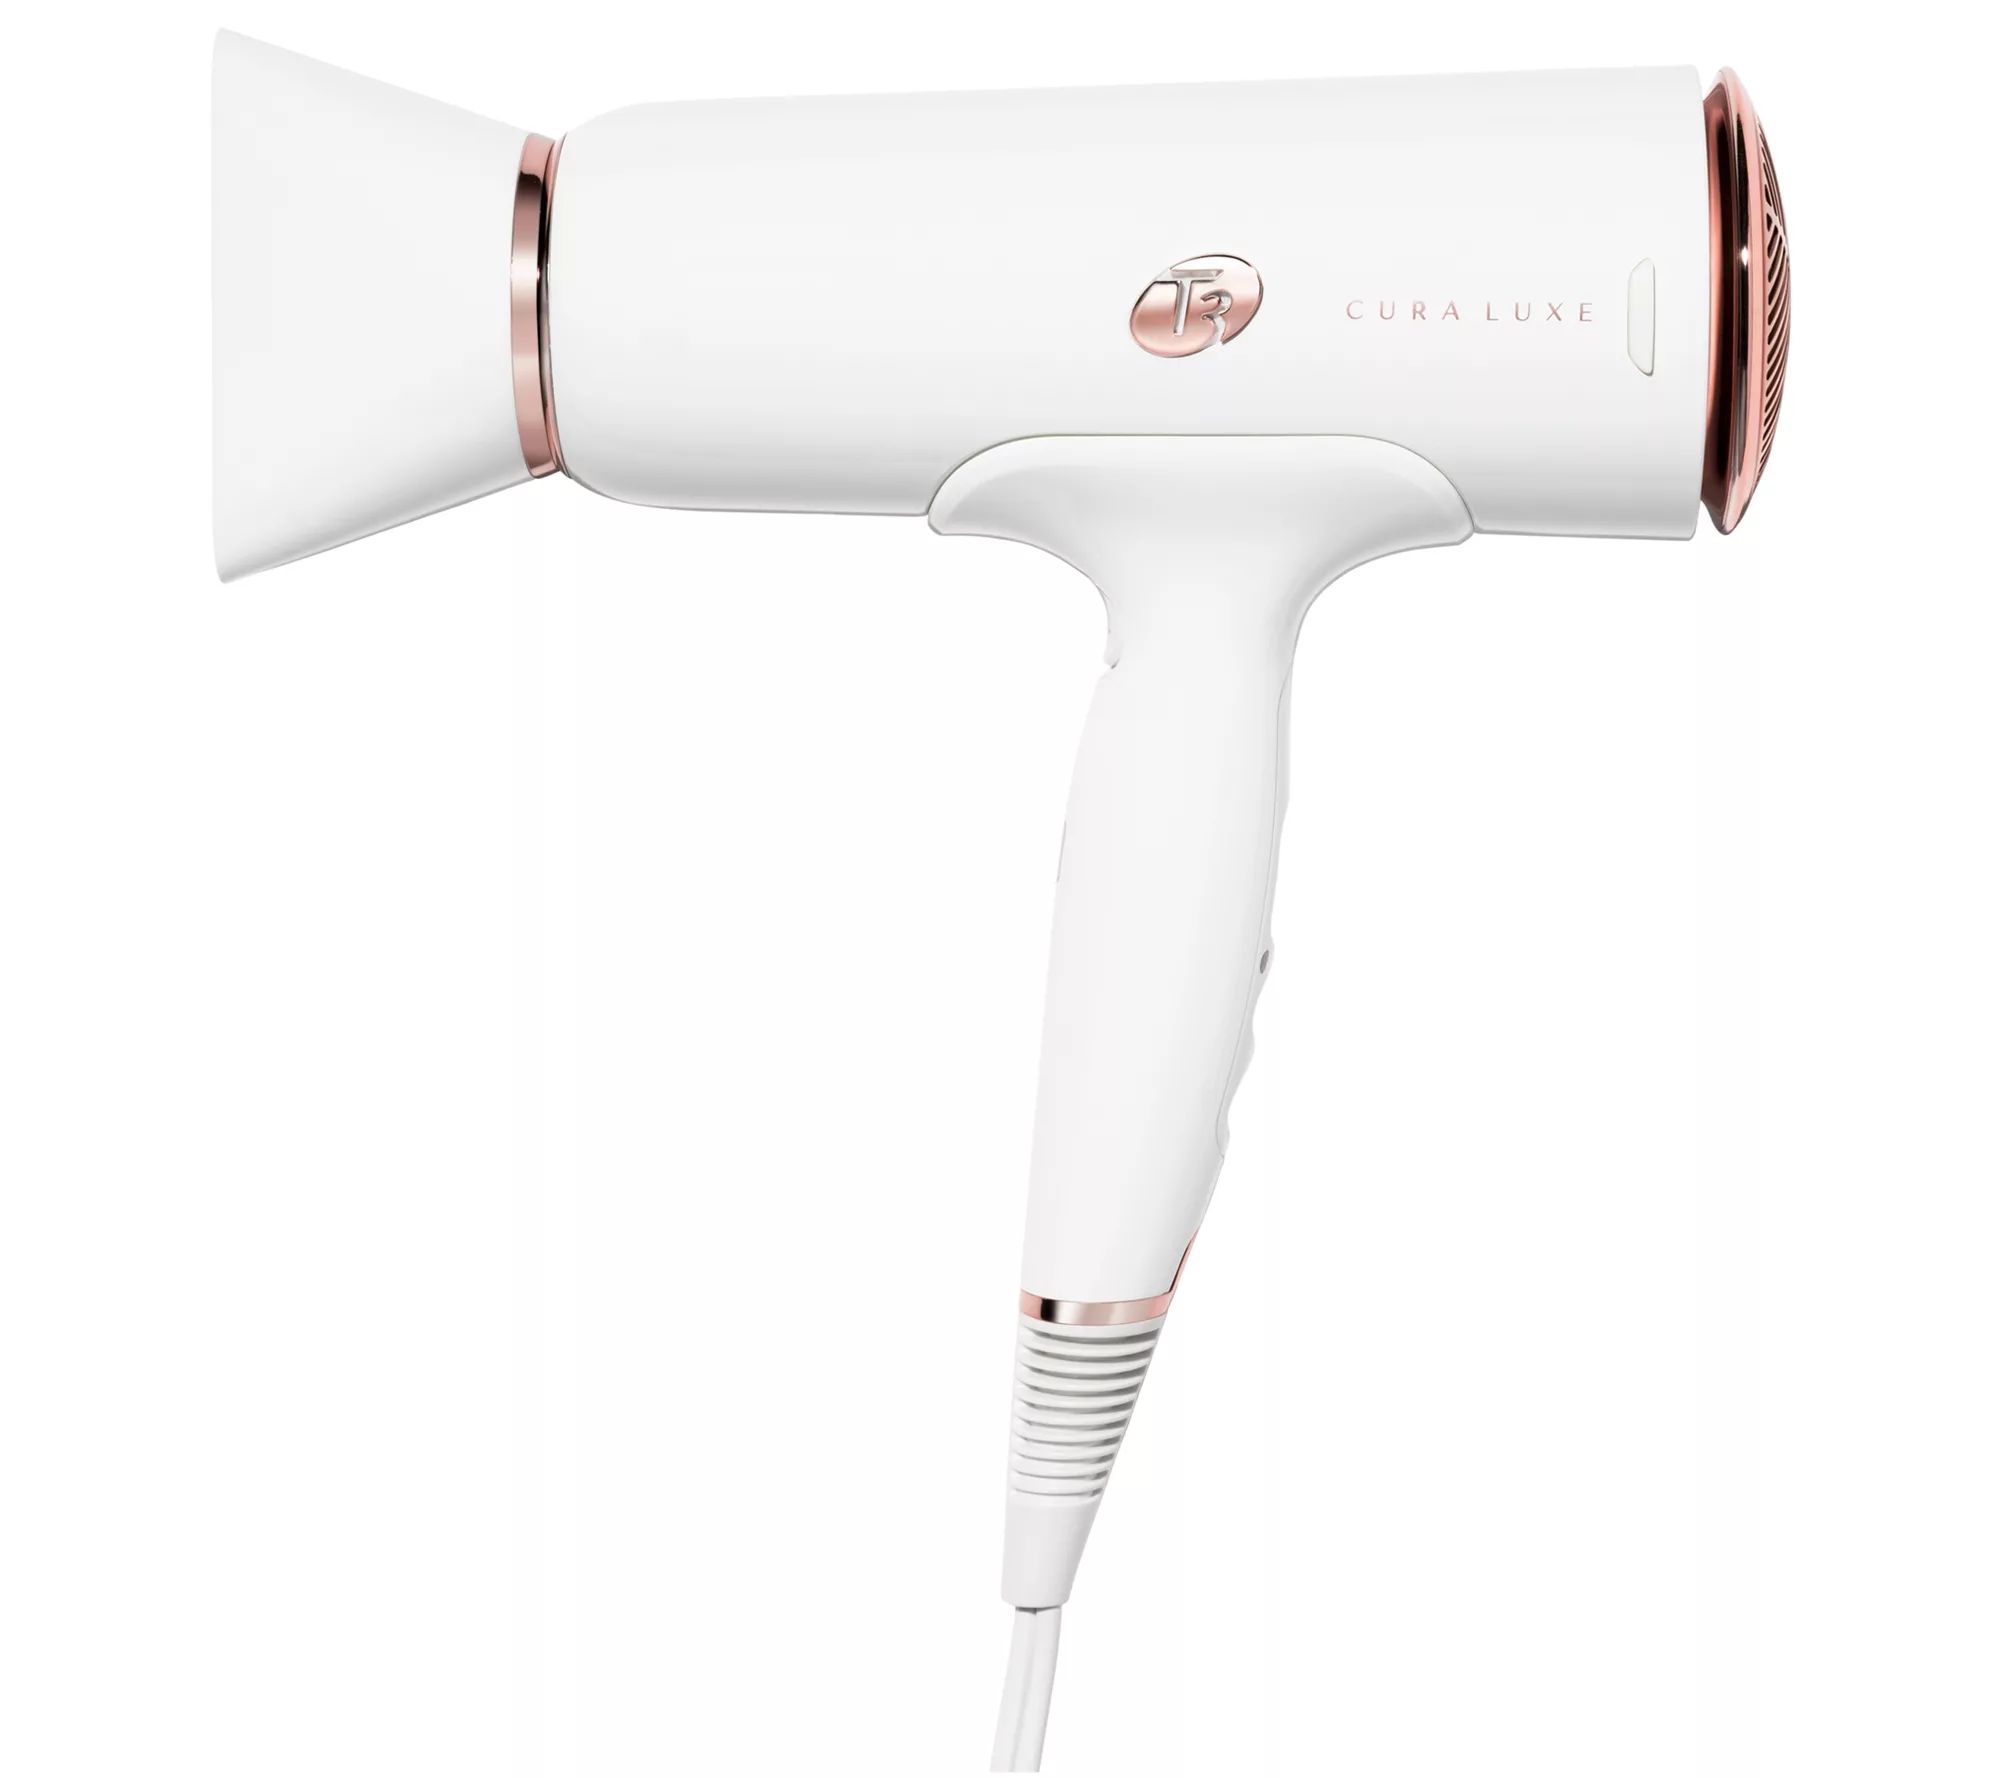 T3 Cura Luxe Hair Dryer - White/Rose Gold | QVC